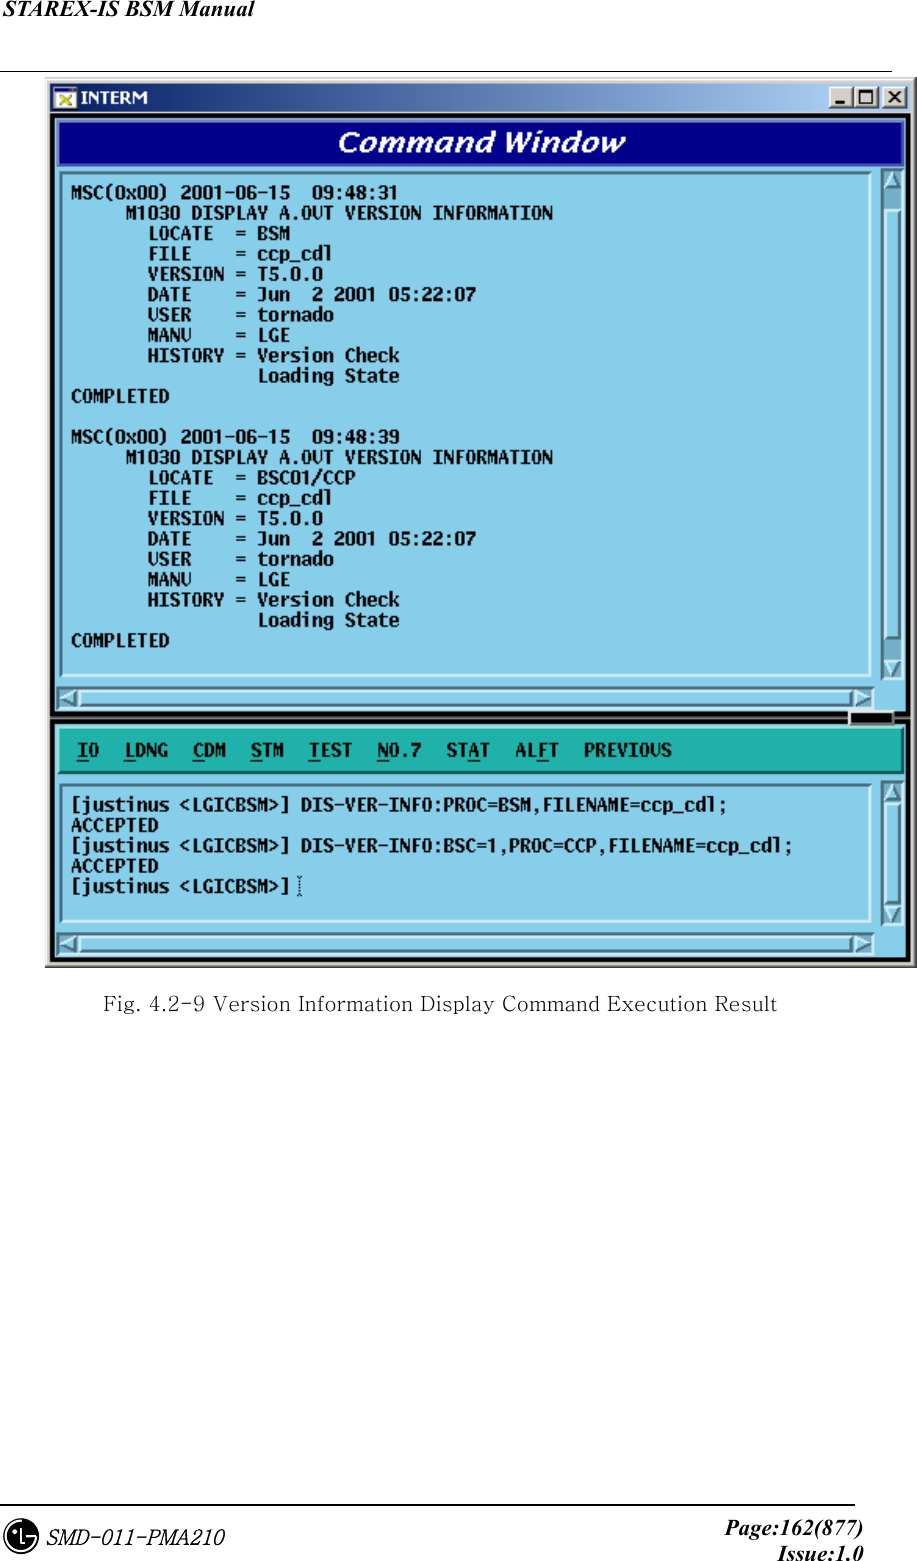 STAREX-IS BSM Manual     Page:162(877)Issue:1.0SMD-011-PMA210  Fig. 4.2-9 Version Information Display Command Execution Result  